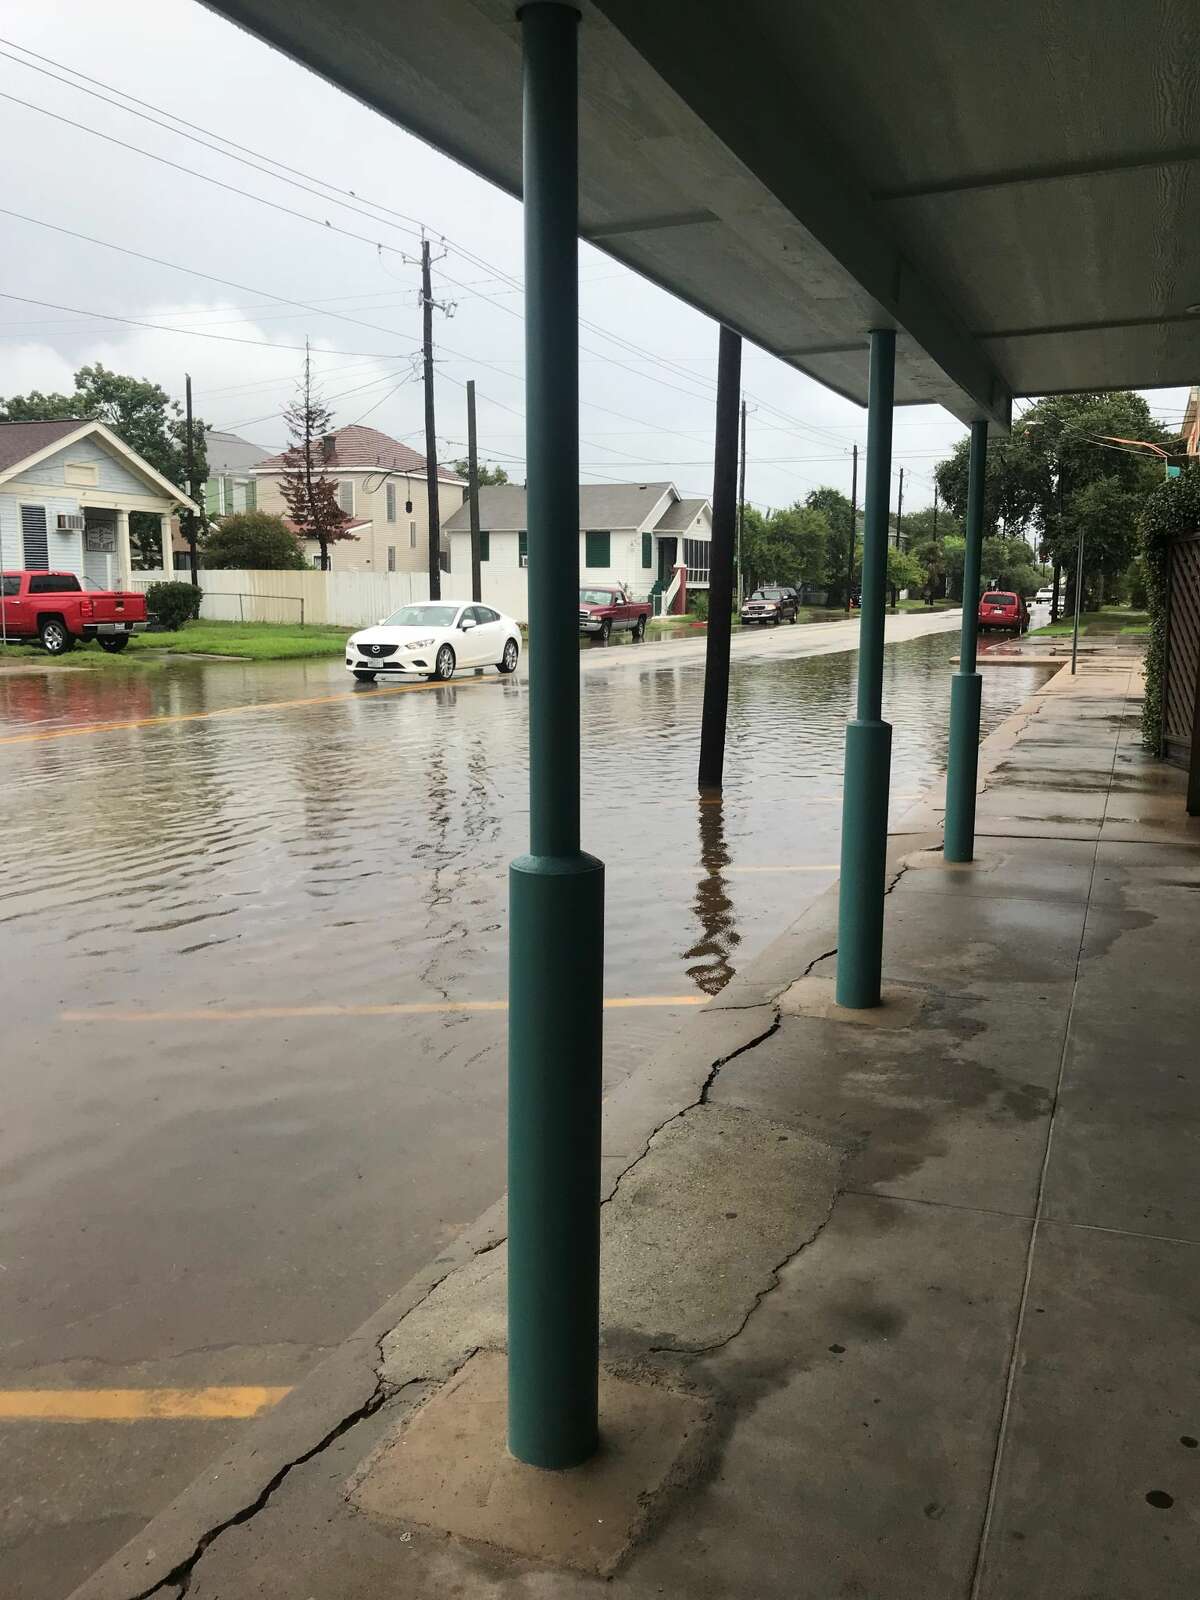 Cars navigate flooding Sept. 11, 2018 at 39th Street and Avenue O in Galveston.